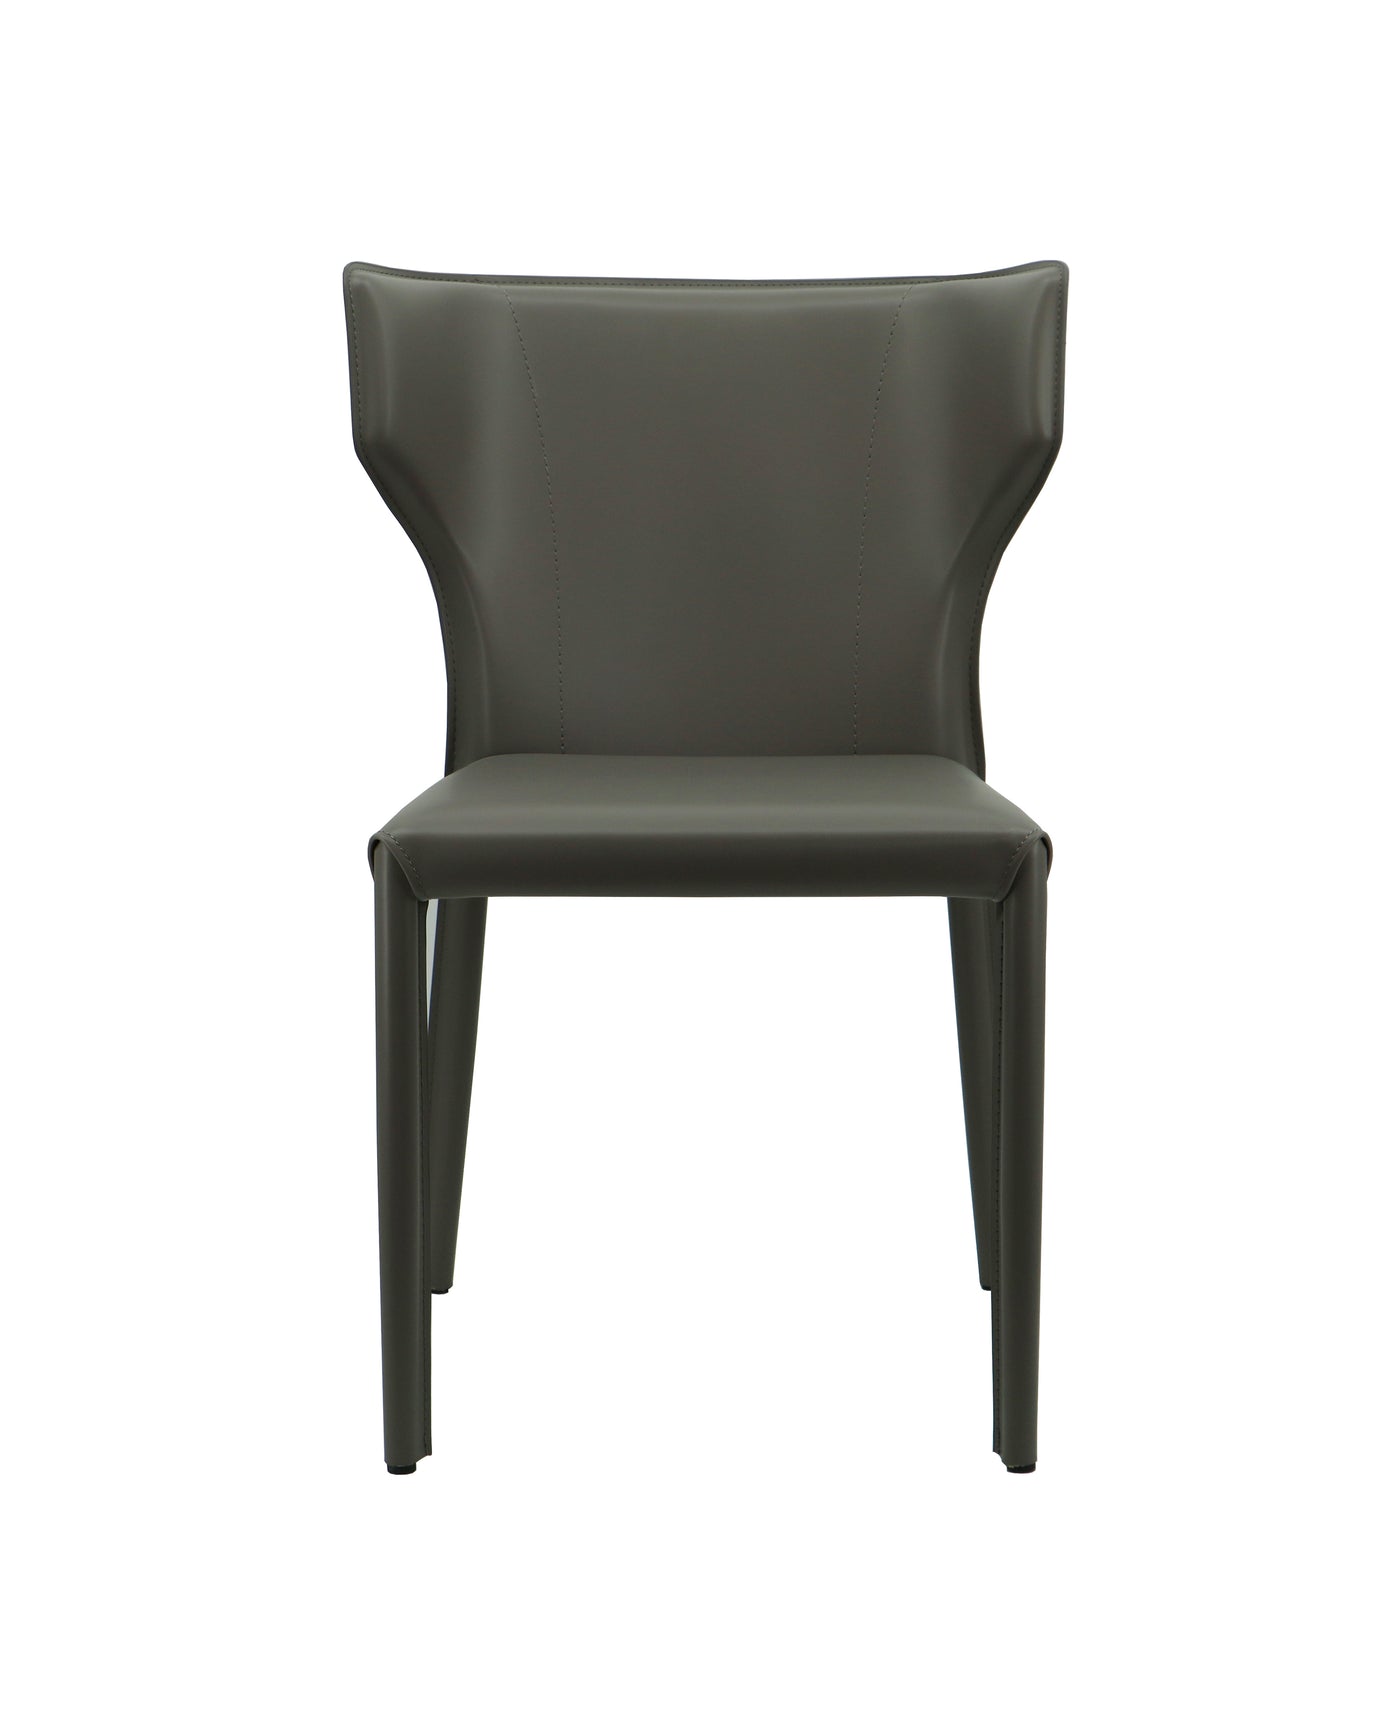 WARSAW DINING CHAIR